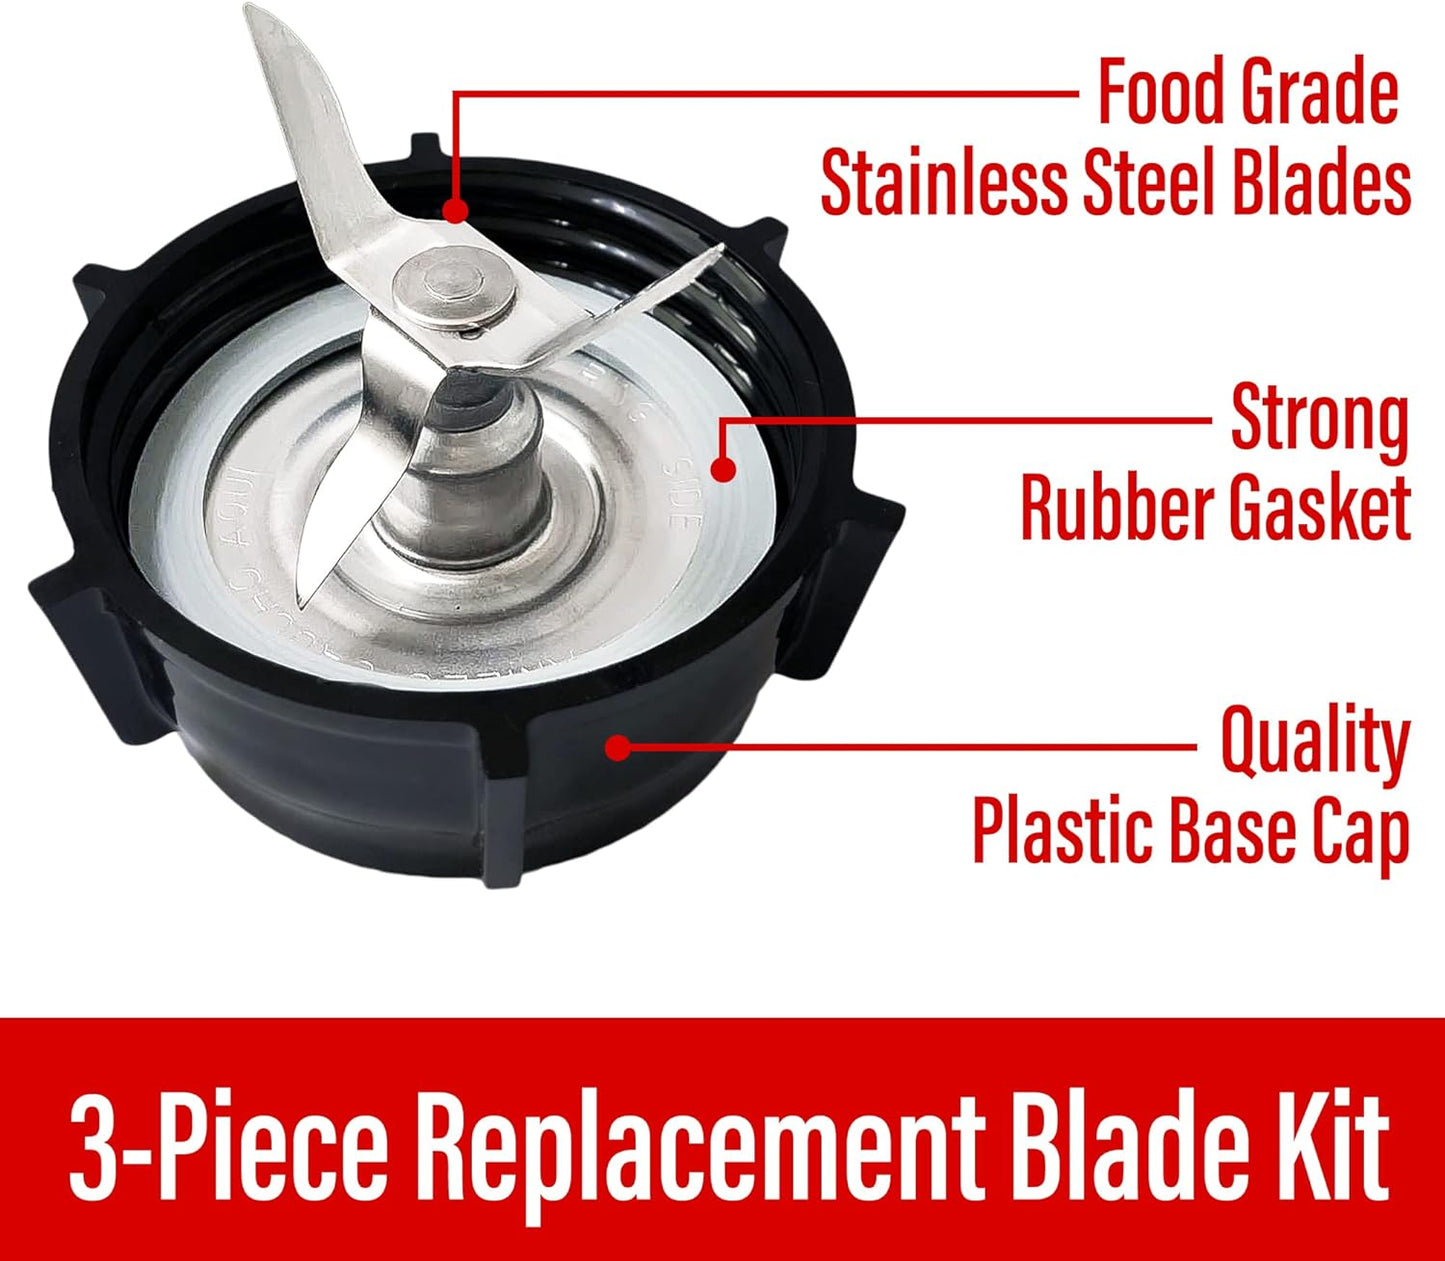 Brentwood Replacement Blade Kit for Oster Blenders